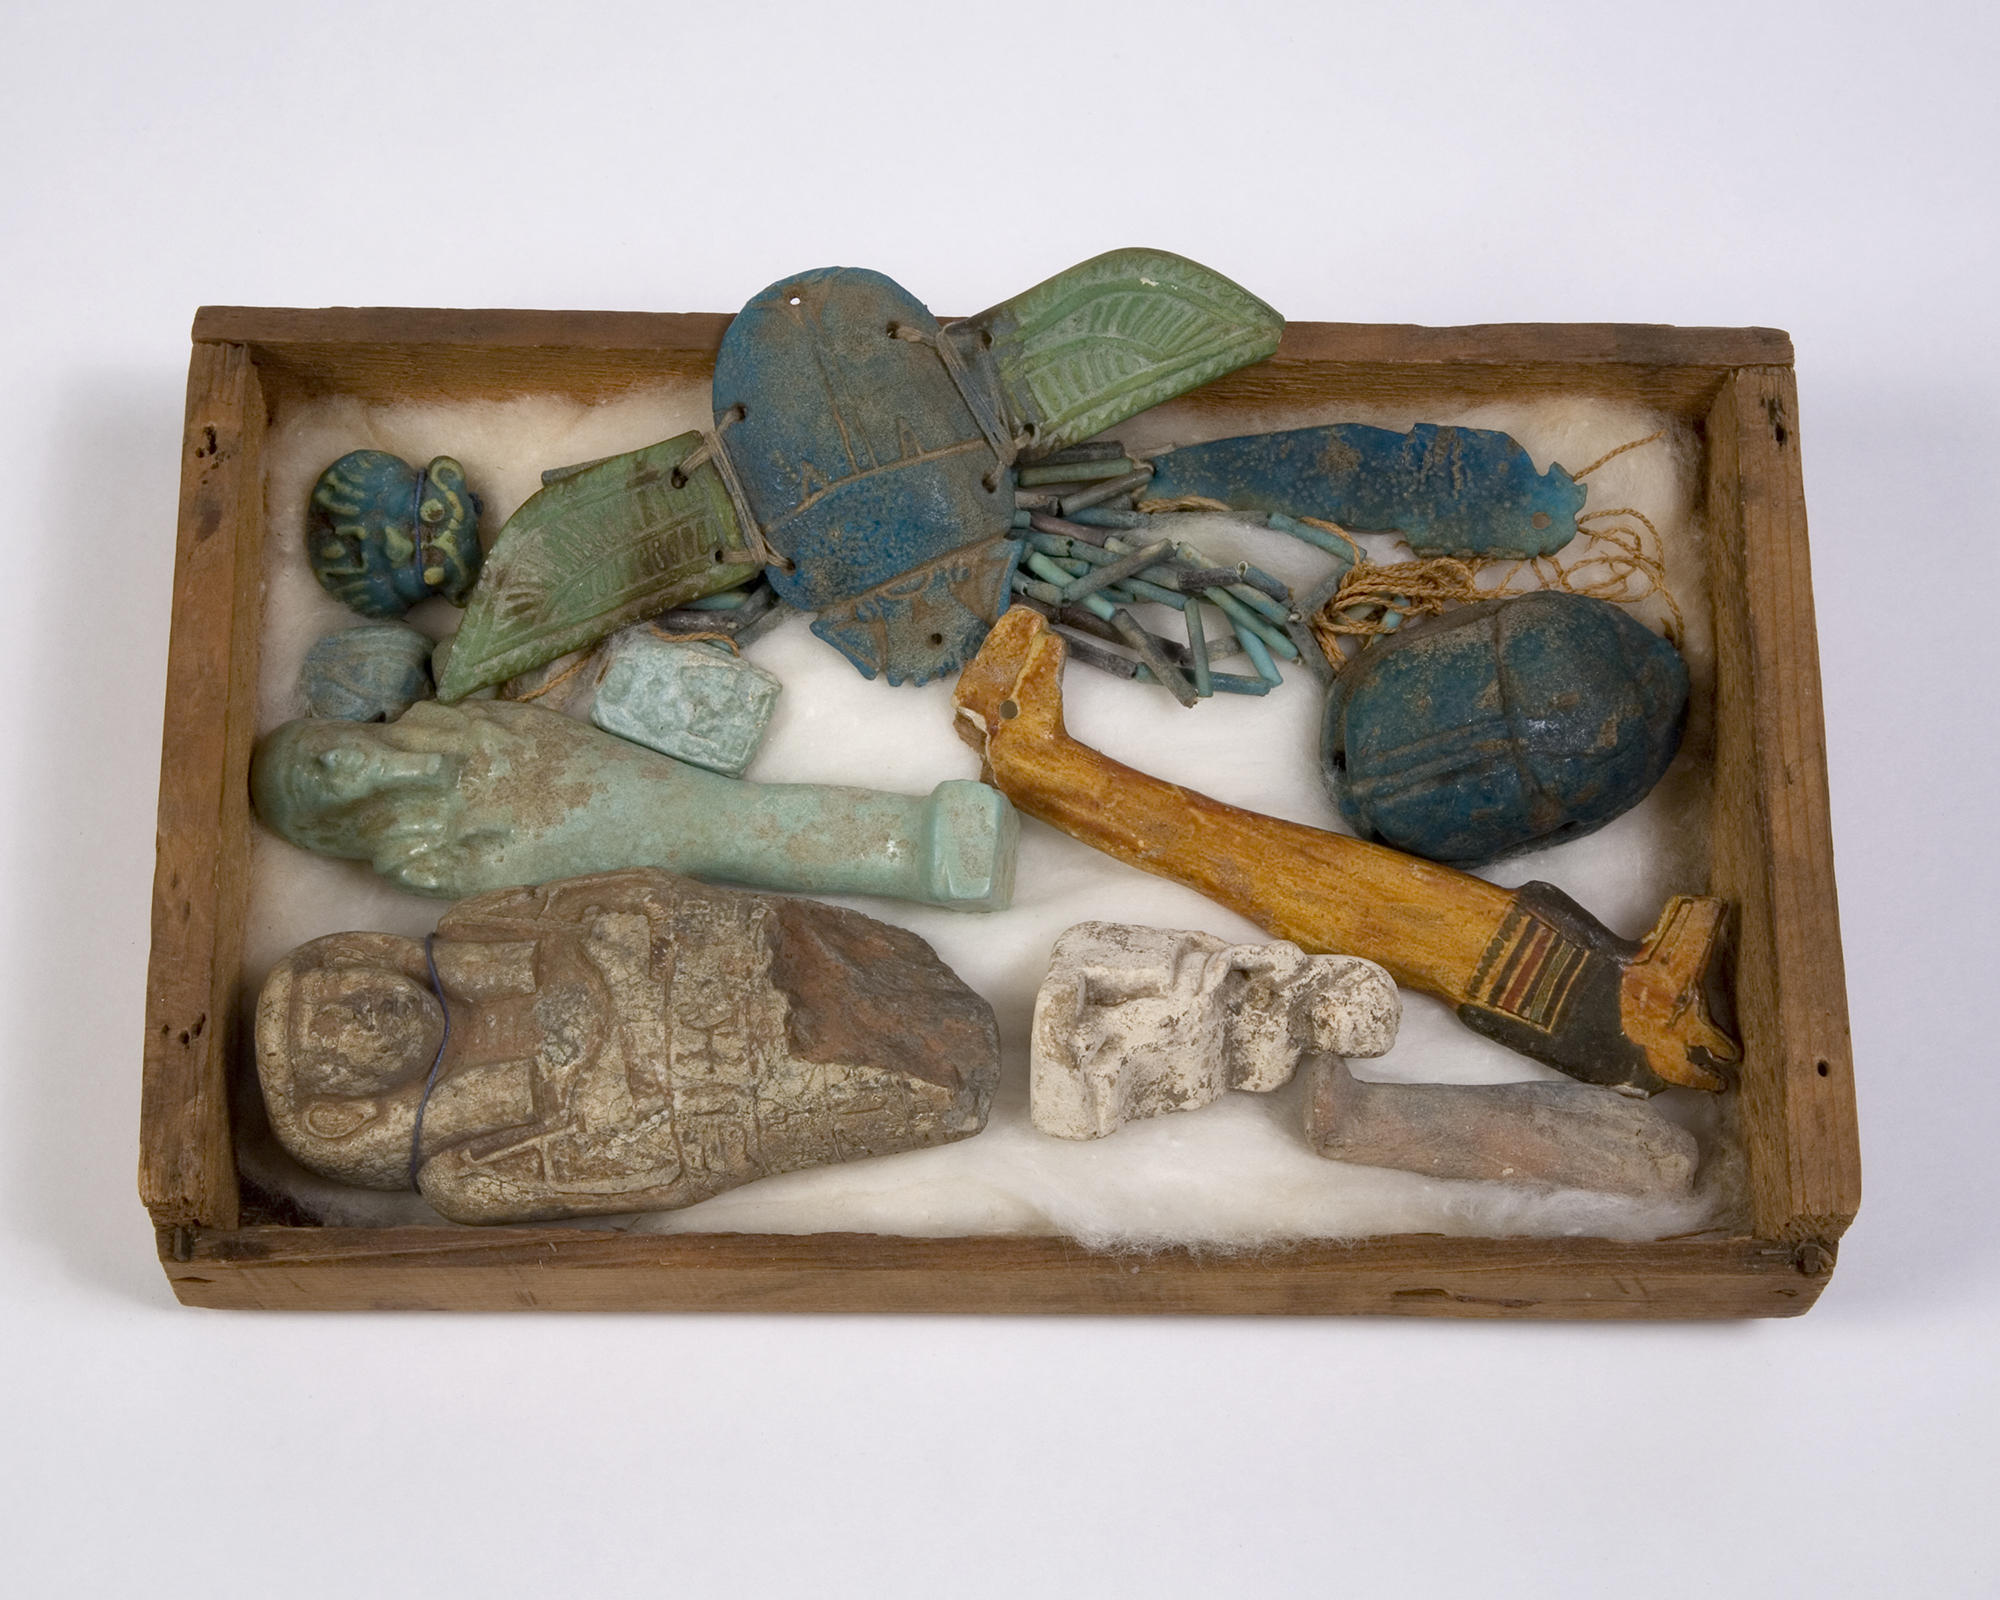 Rectangular wooden tray holding various carved statuettes, scarabs, and beads.